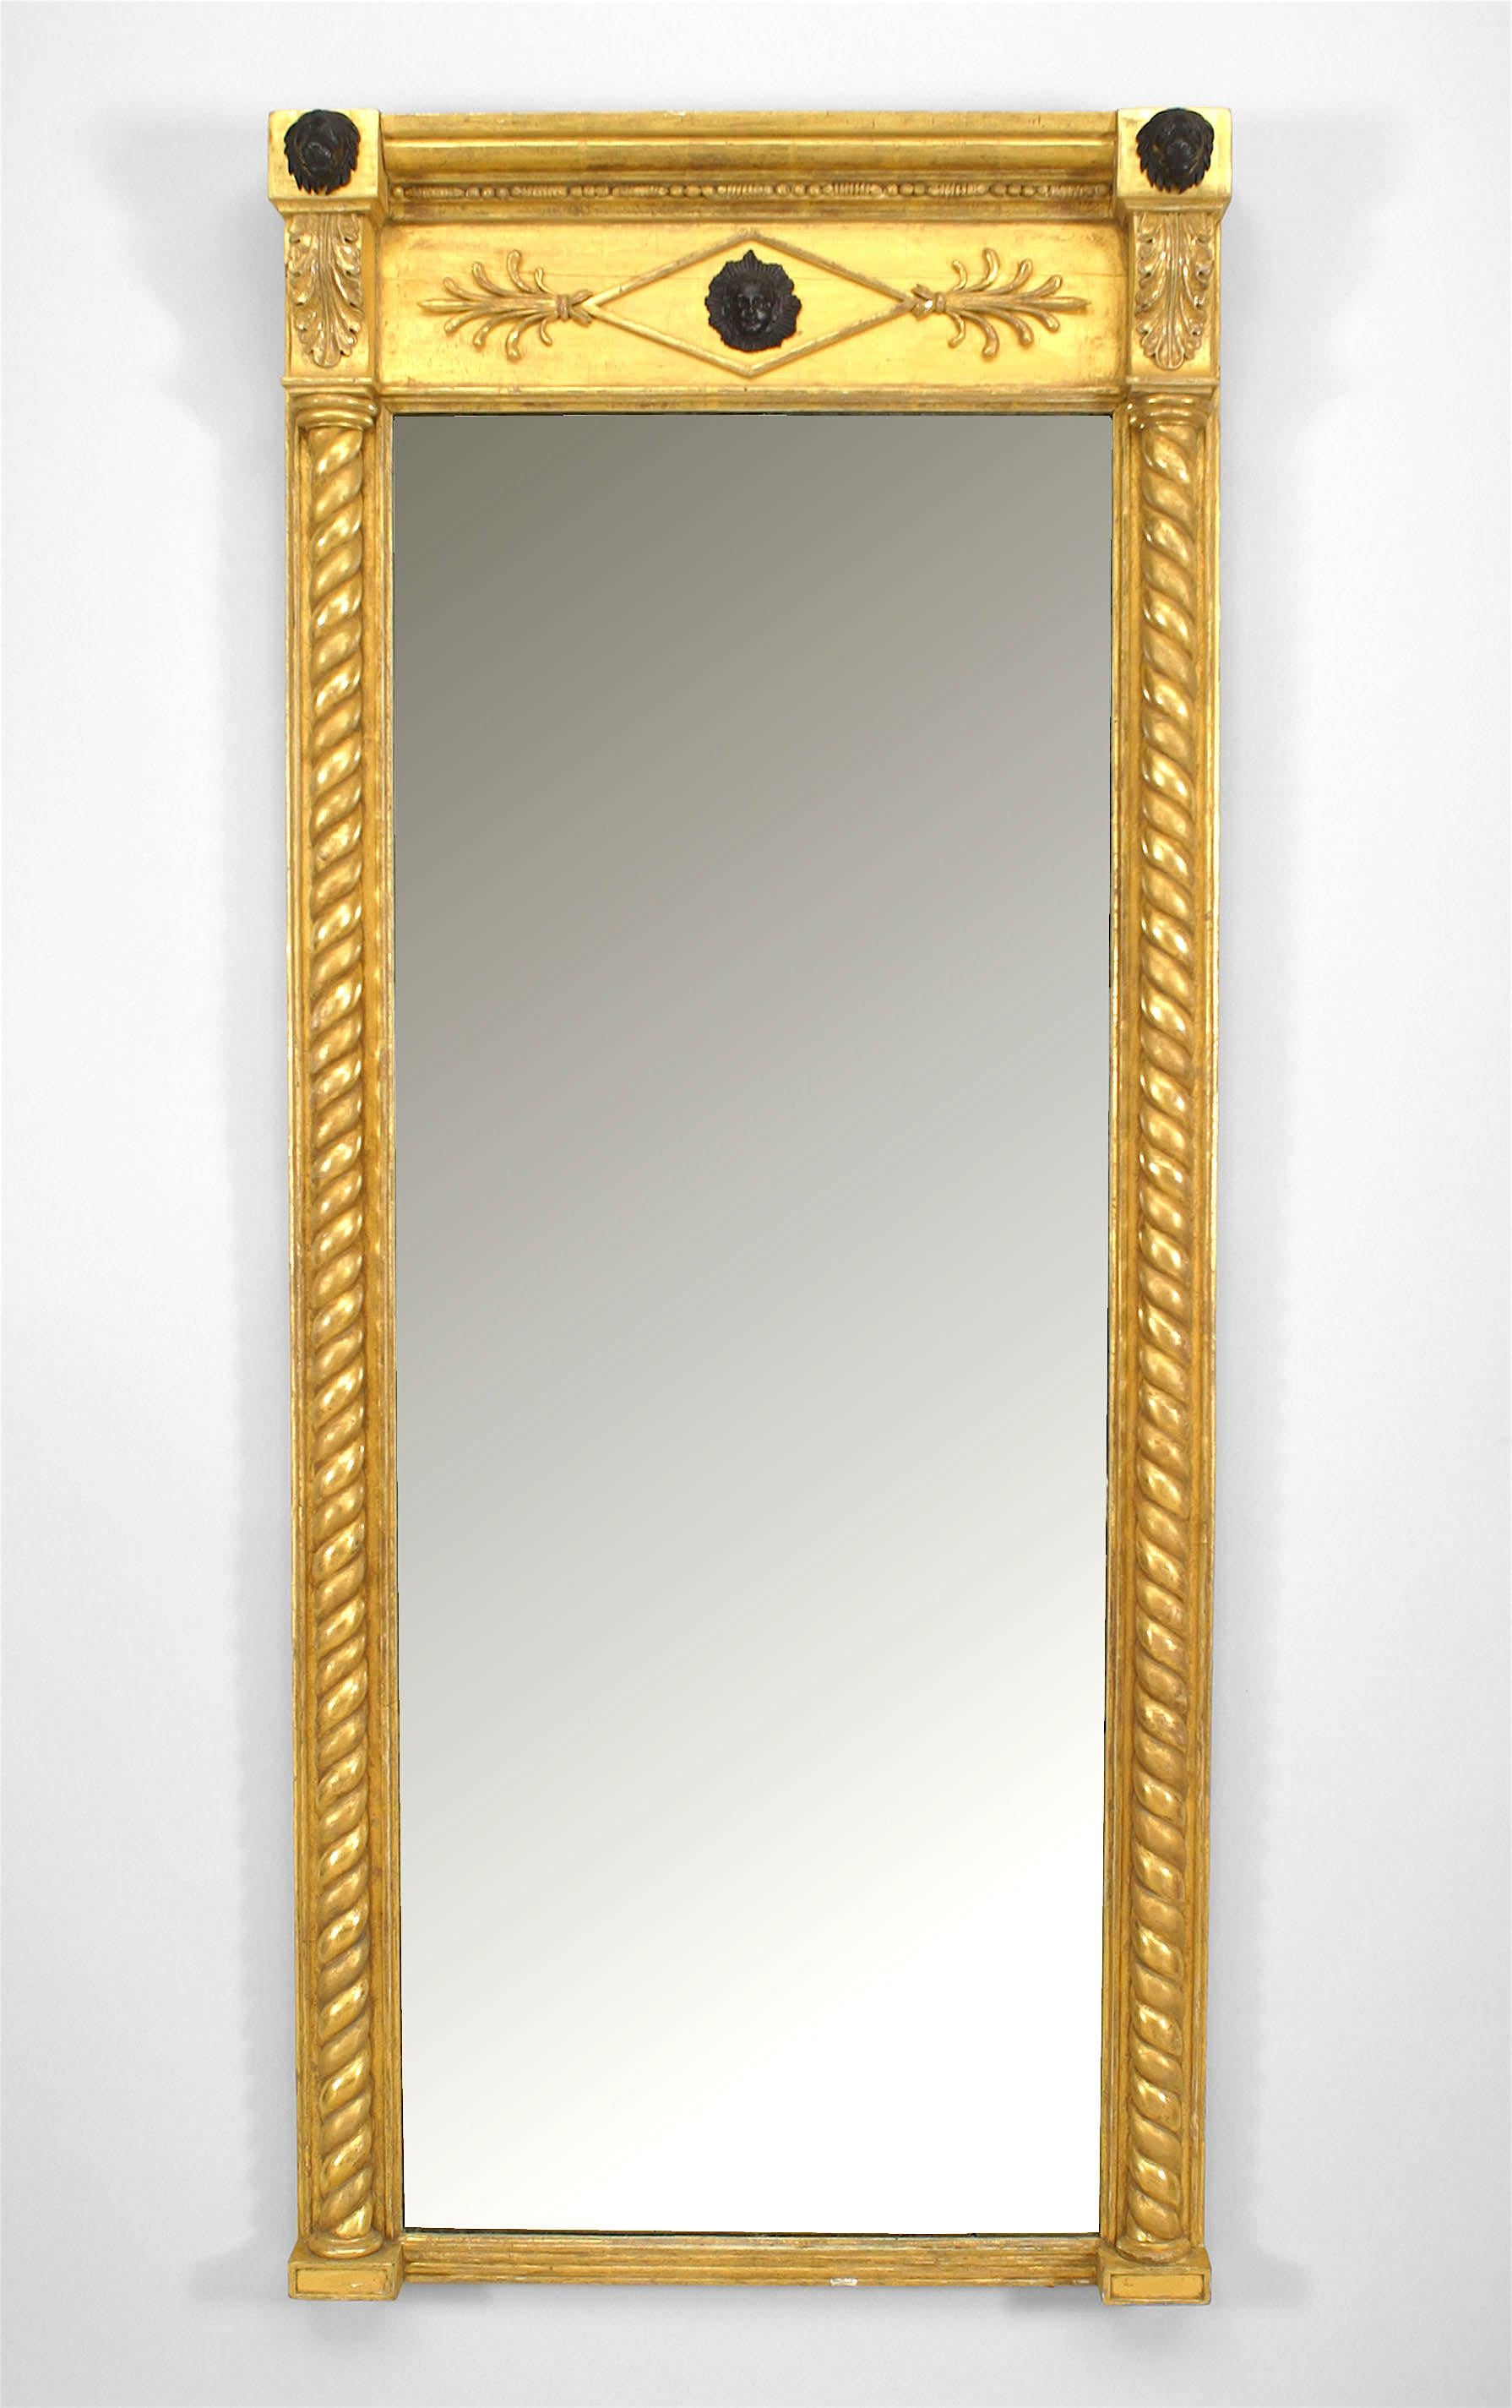 Pair of English Regency gilt rectangular wall mirrors with swirl column sides under a cornice with an ebonized female mask and two lion head ornaments. (PRICED AS Pair).
 